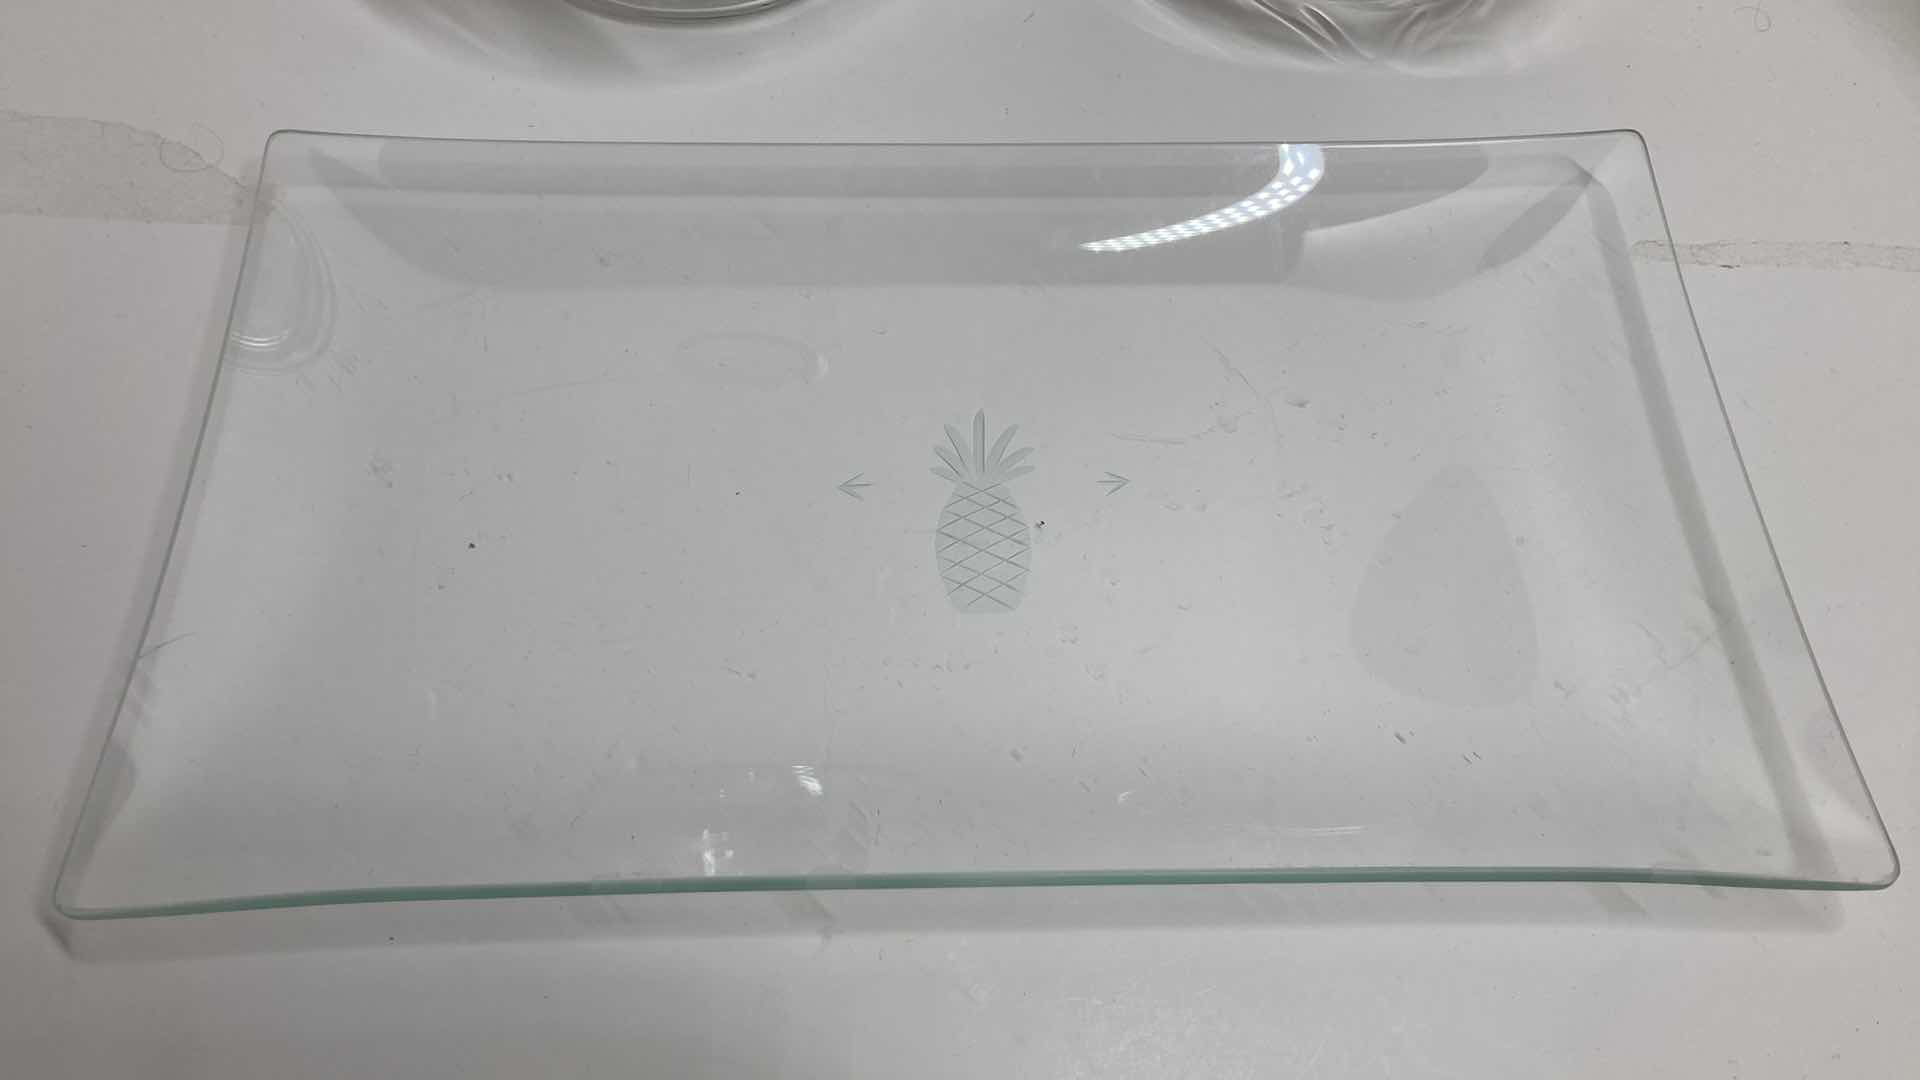 Photo 4 of PINEAPPLE THEMED CLEAR GLASS JAR, BOWL, PLATTER 13.75” X 7.75”